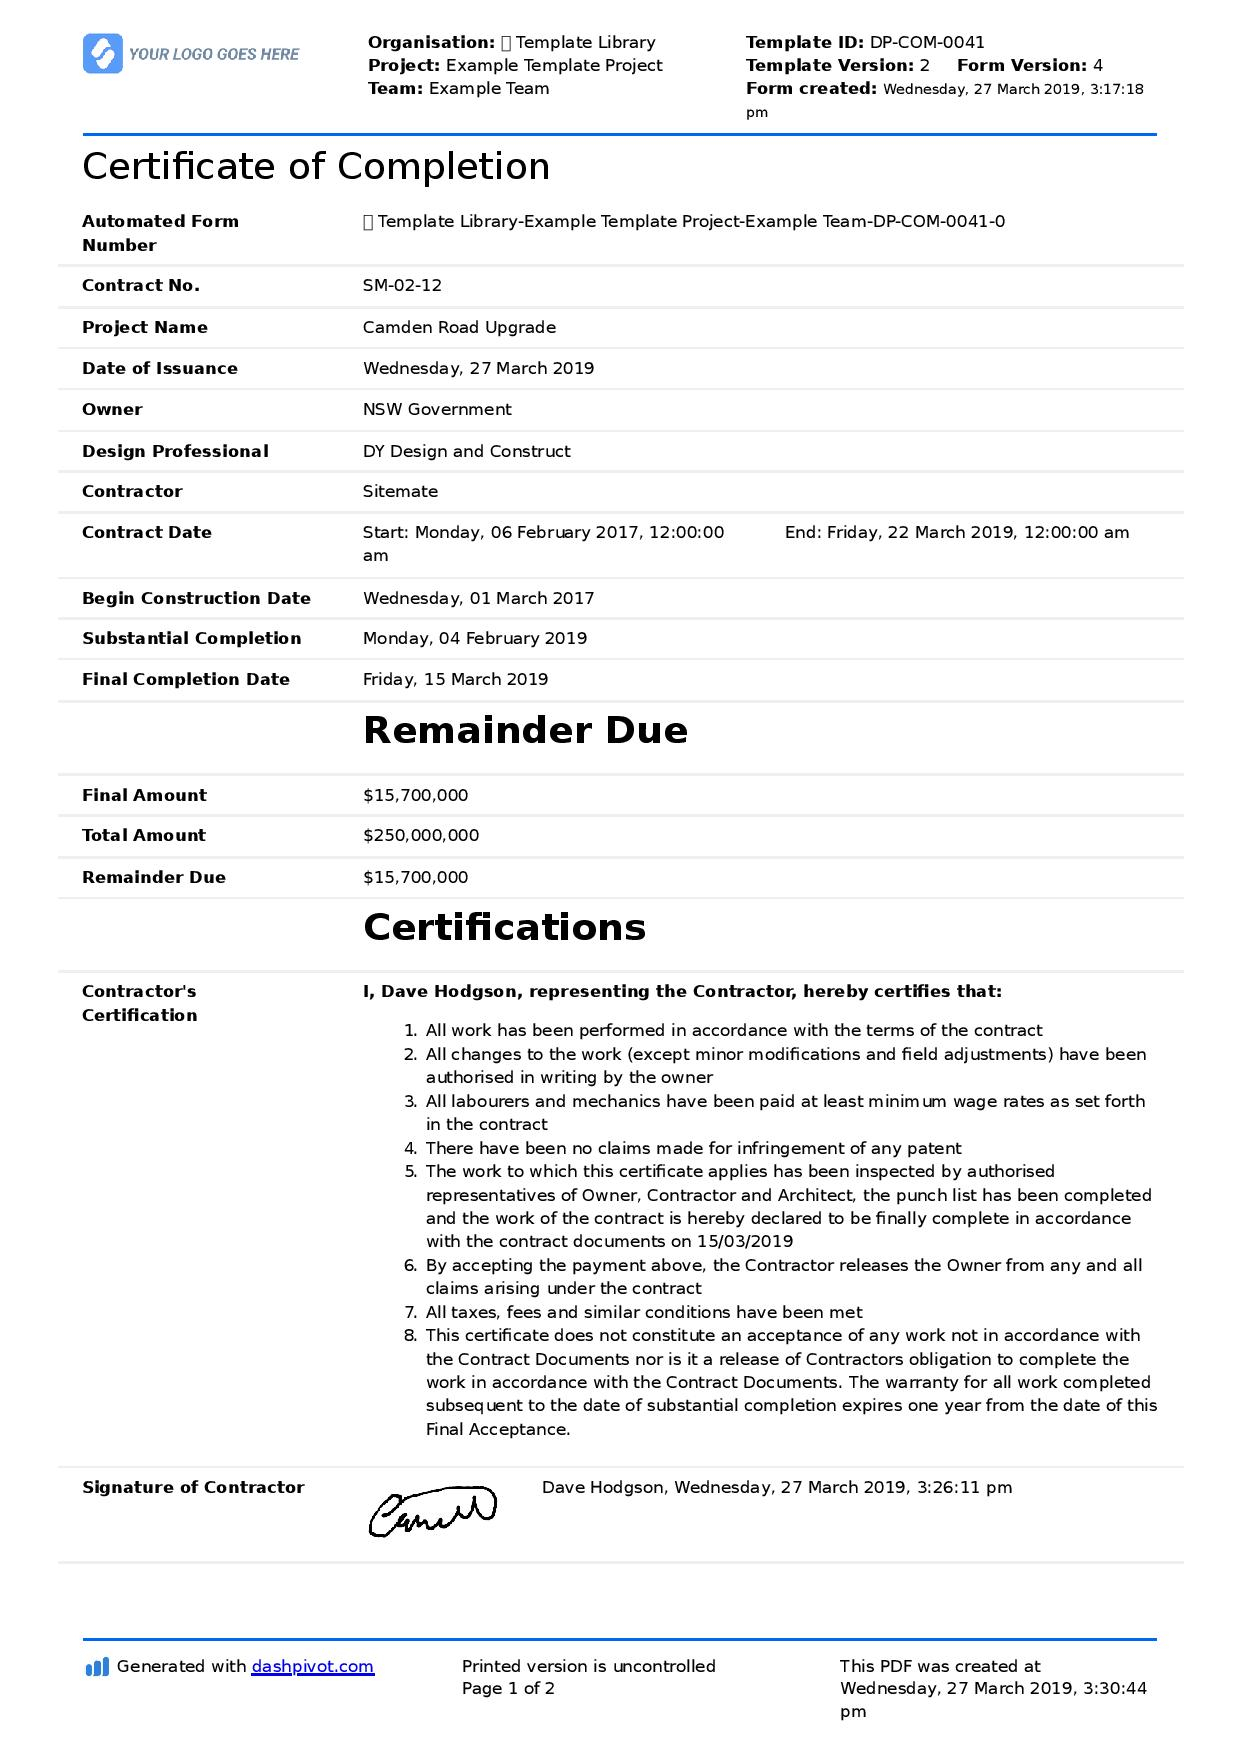 Certificate Of Completion For Construction (Free Template + Sample) for Certificate Of Completion Construction Templates